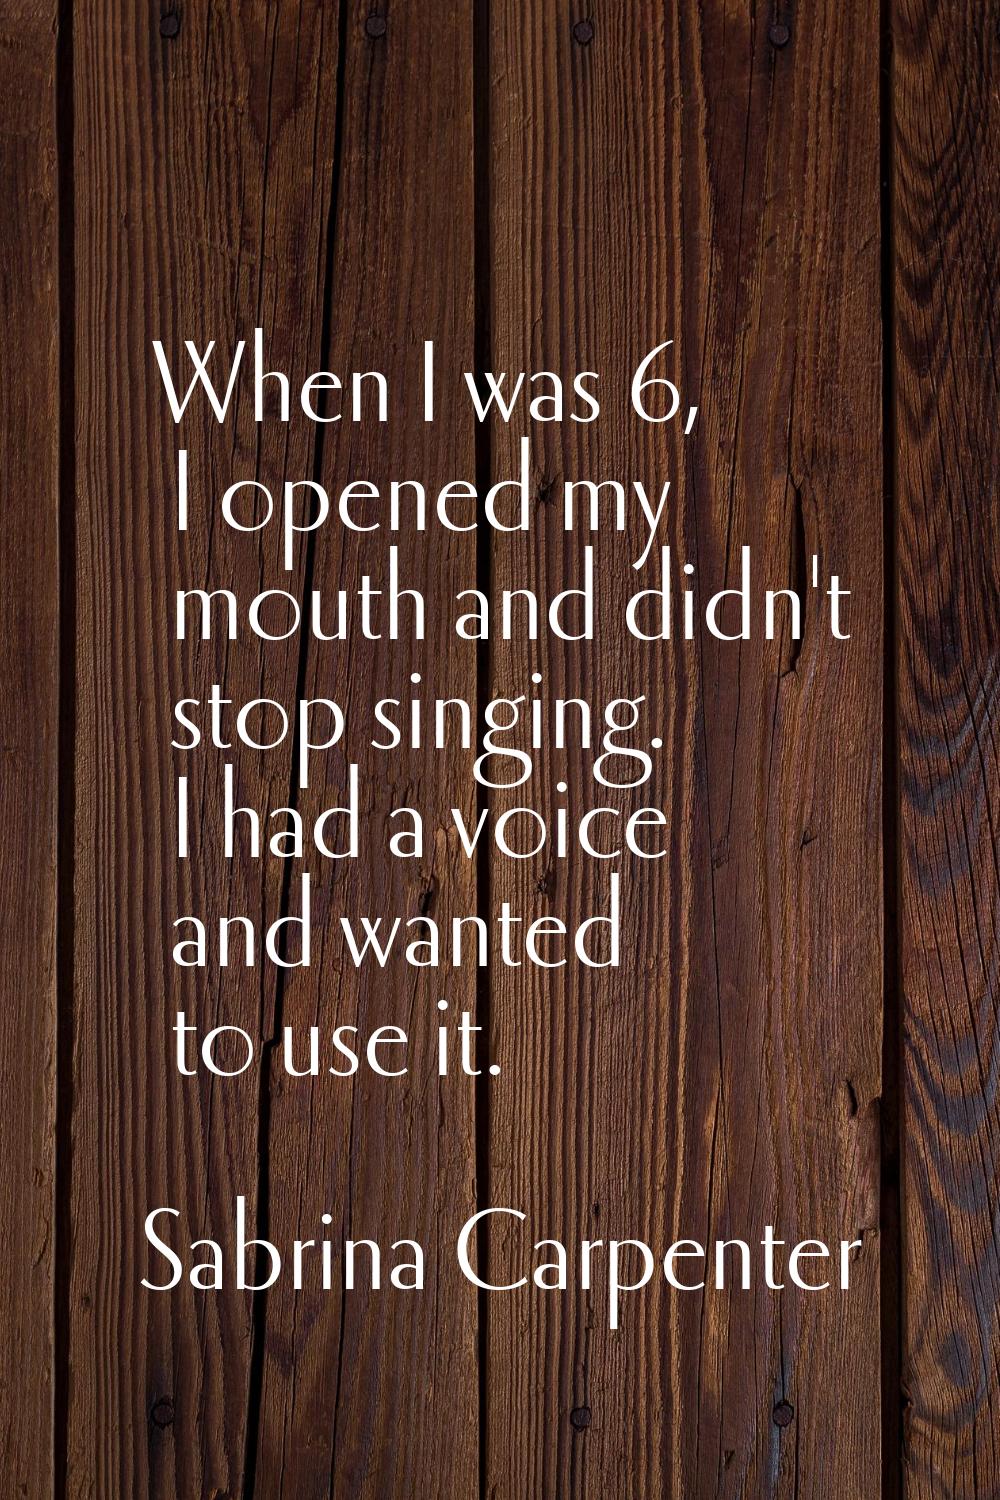 When I was 6, I opened my mouth and didn't stop singing. I had a voice and wanted to use it.